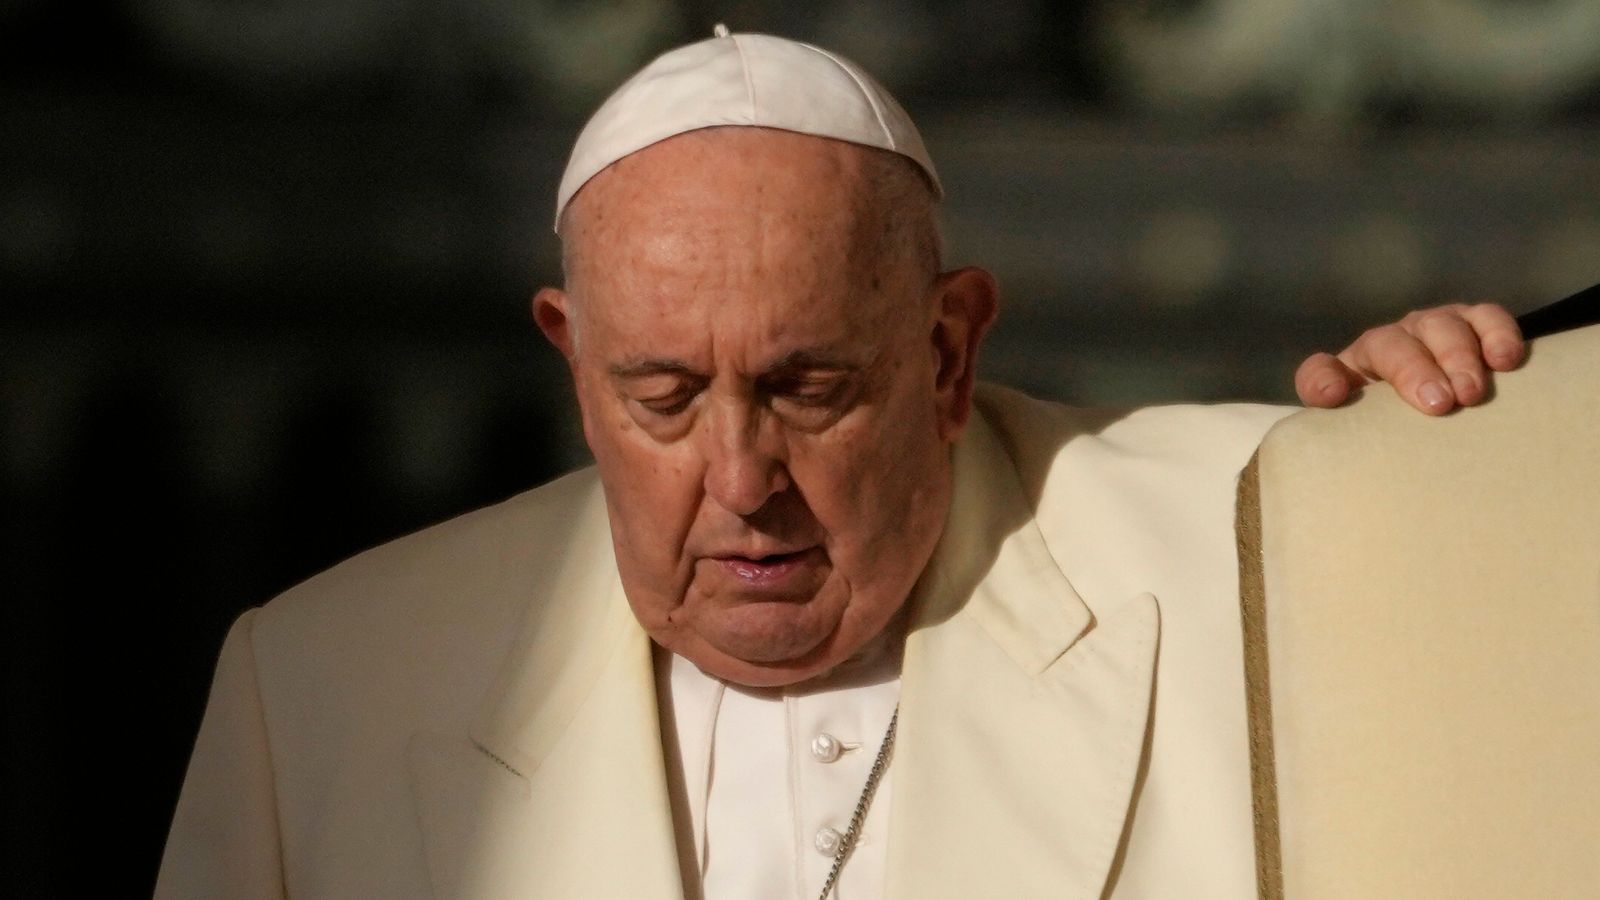 Pope Francis cancels planned audiences due to 'mild flu'